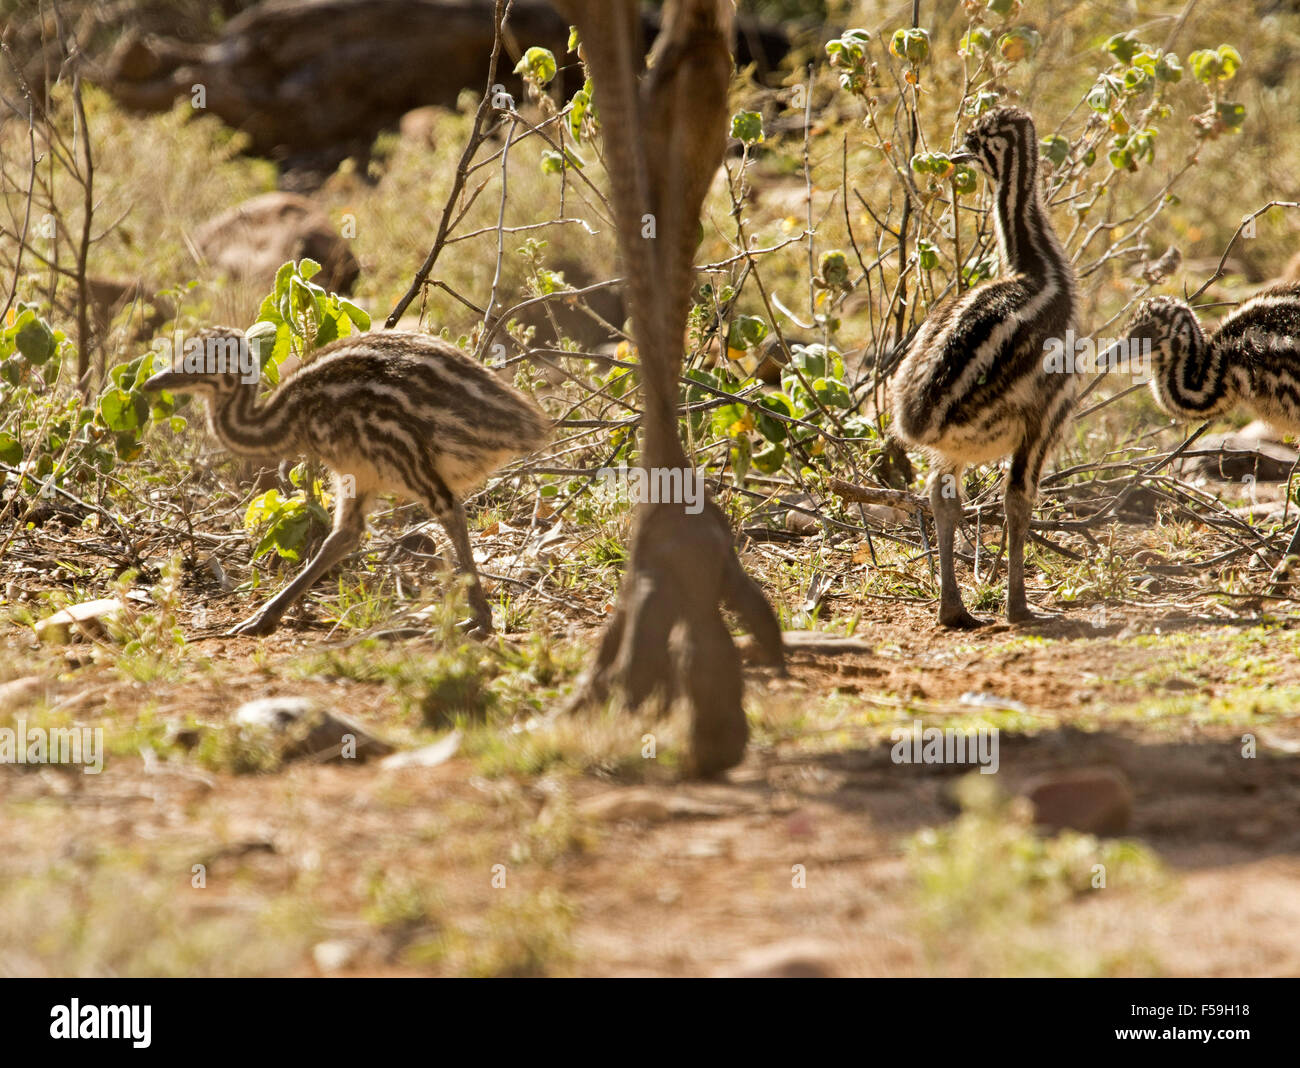 Three tiny emu chicks with striped down beside and dwarfed by large foot & part of leg of parent bird in the wild in outback Australia Stock Photo